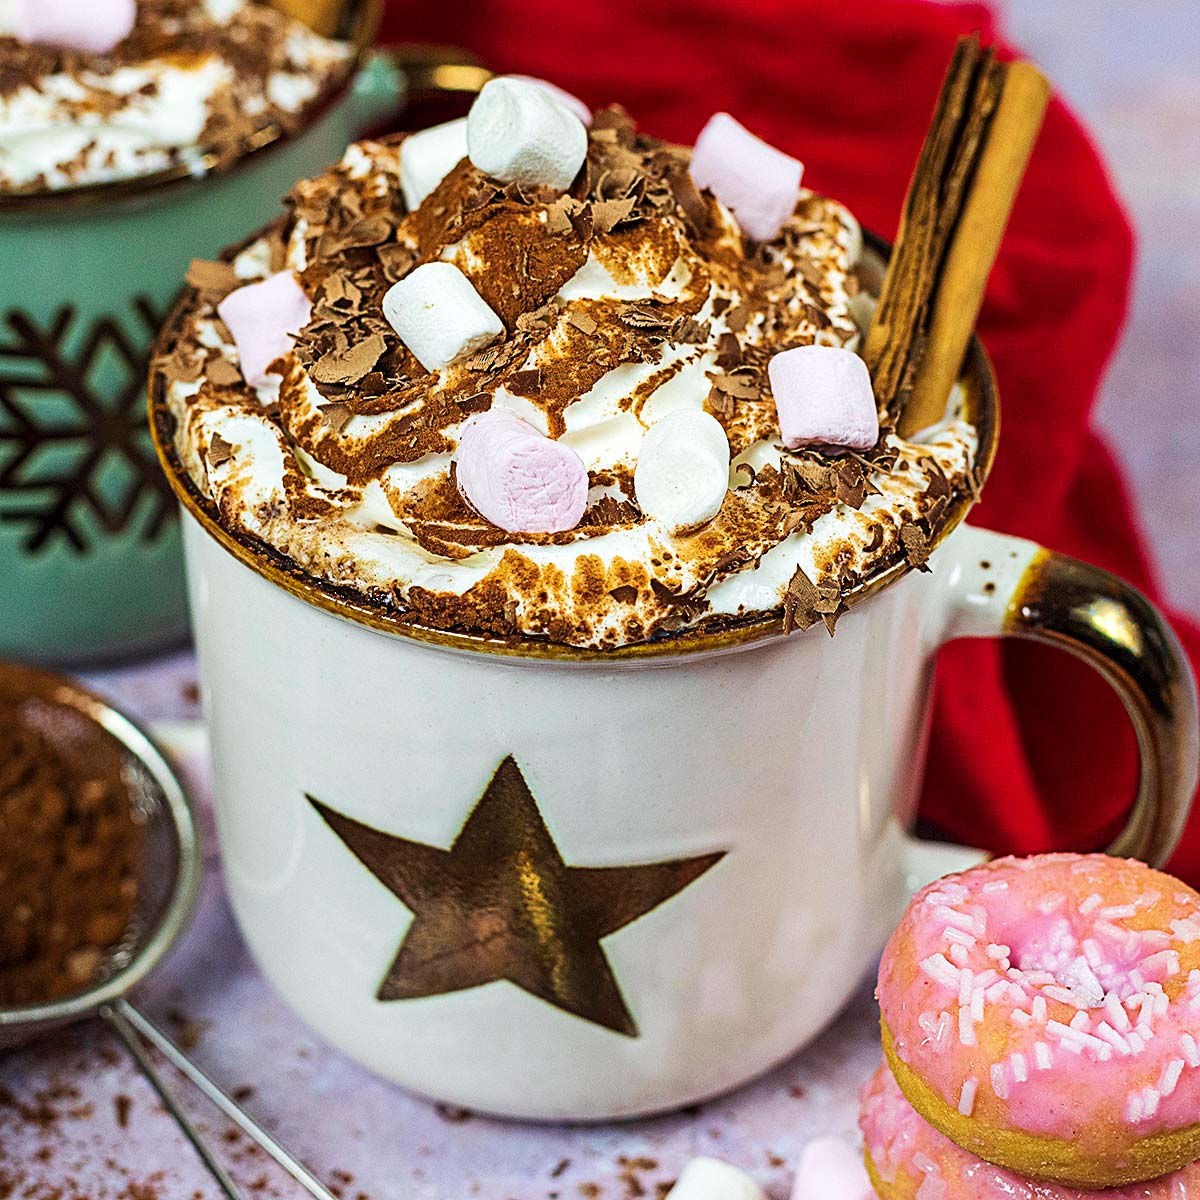 https://hungryhealthyhappy.com/wp-content/uploads/2020/11/Slow-Cooker-Hot-Chocolate-featured-b.jpg